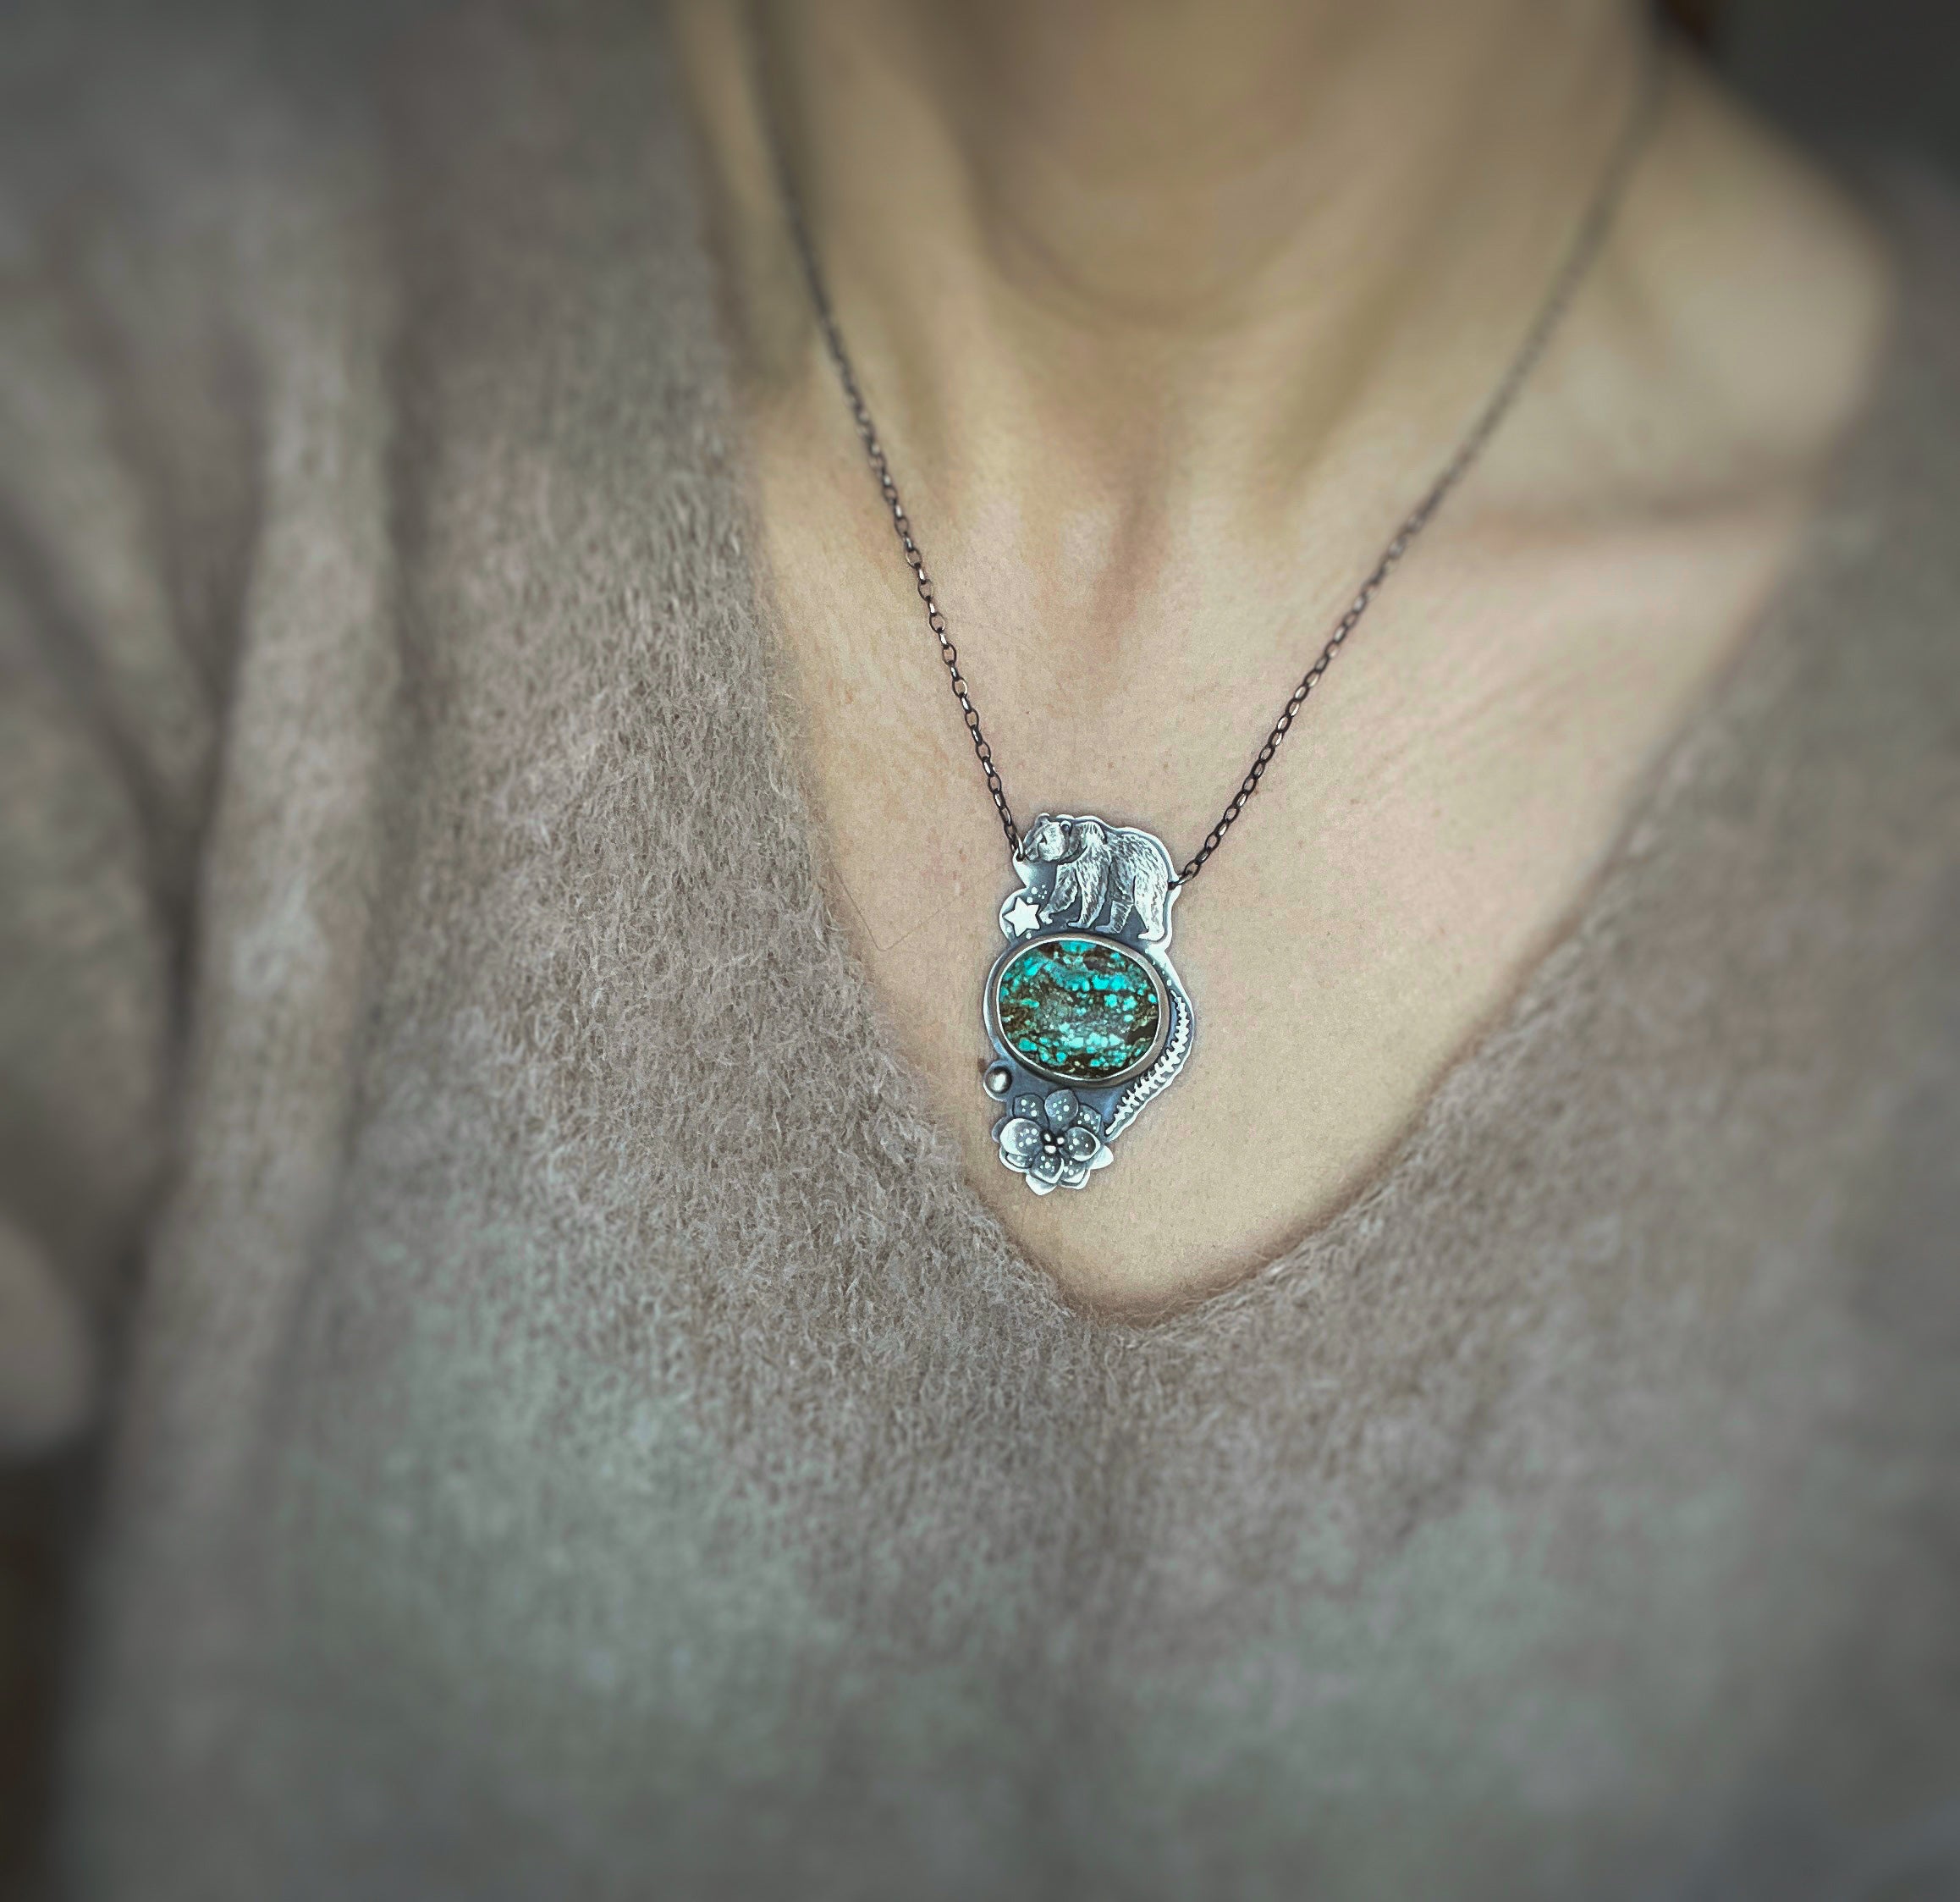 The Bear & No. 8 Turquoise Necklace